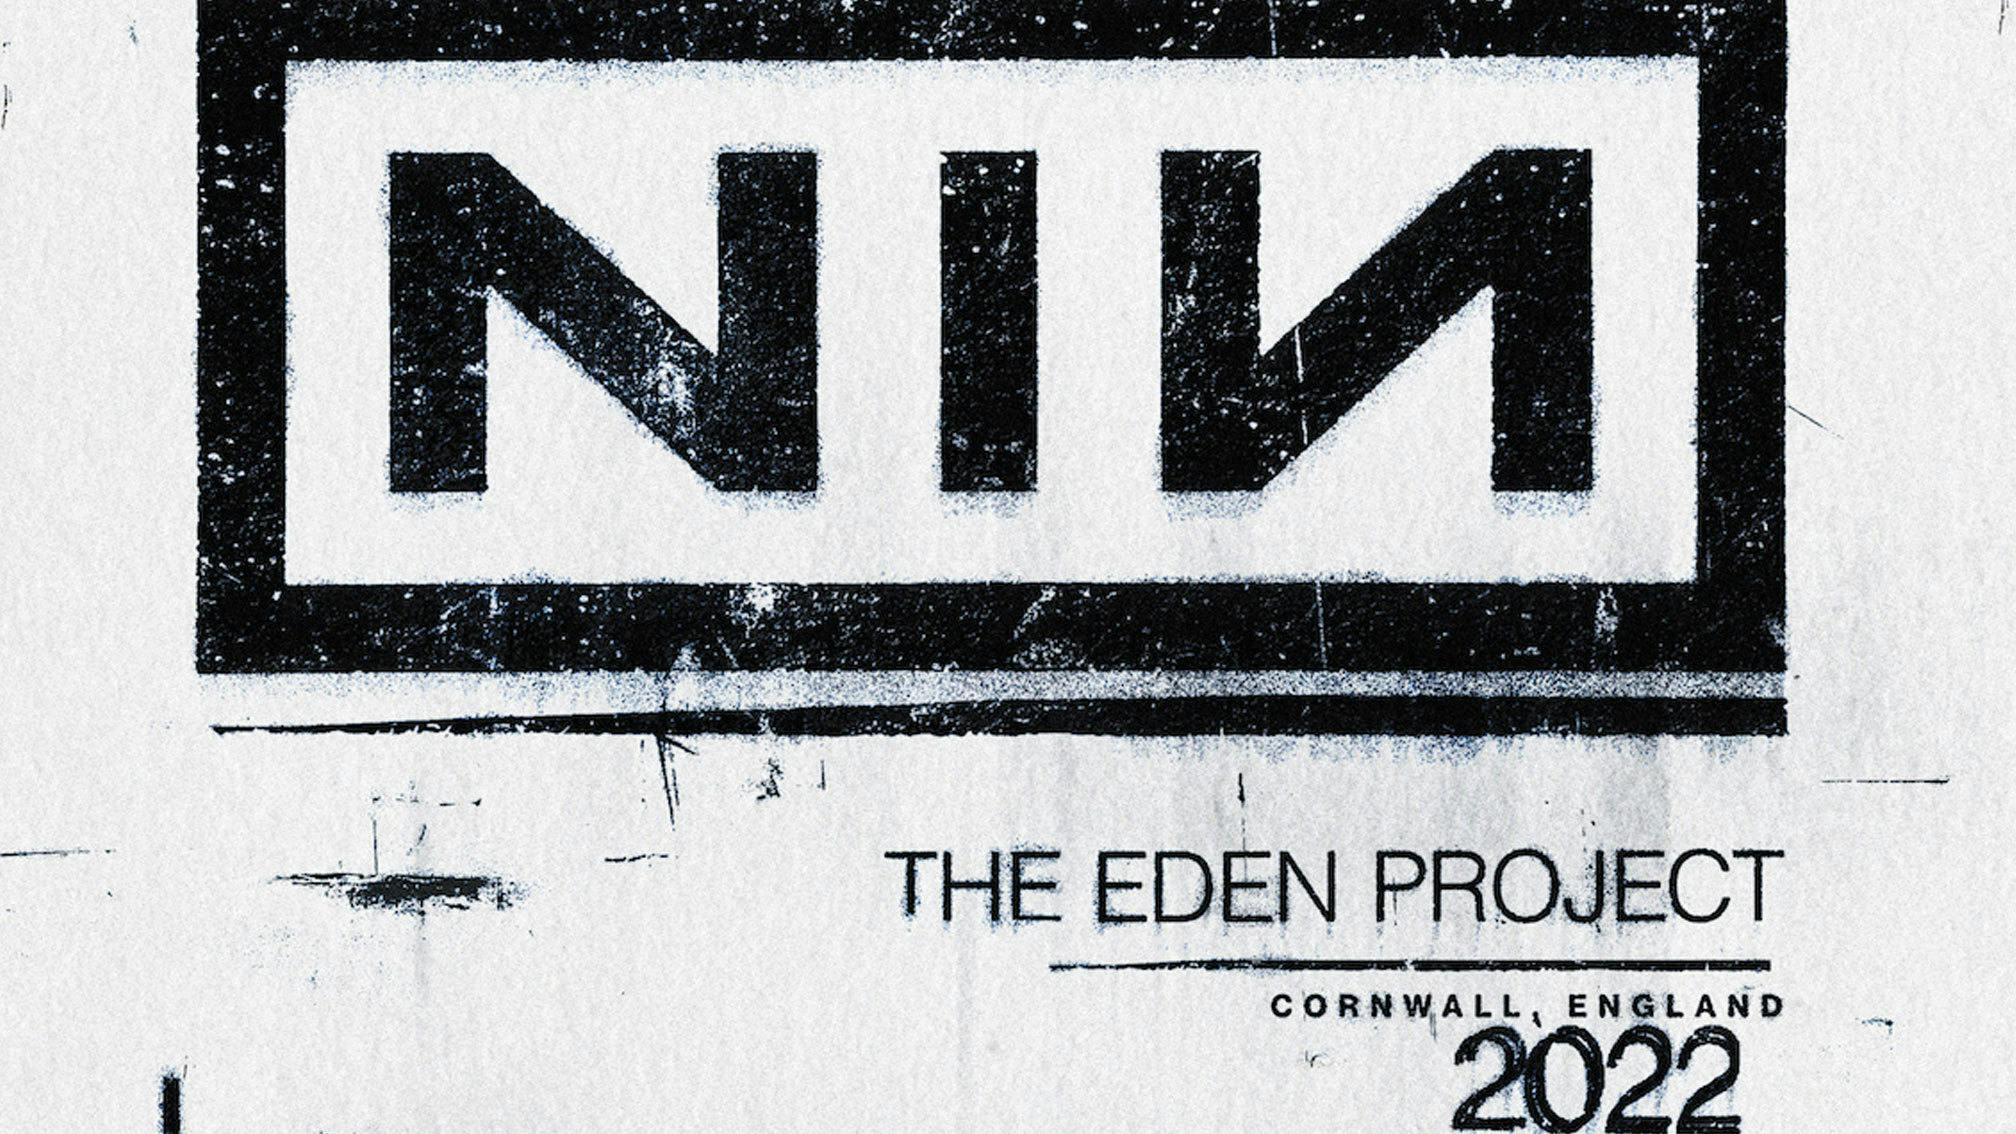 Nine Inch Nails announce supports for their UK Eden Project shows